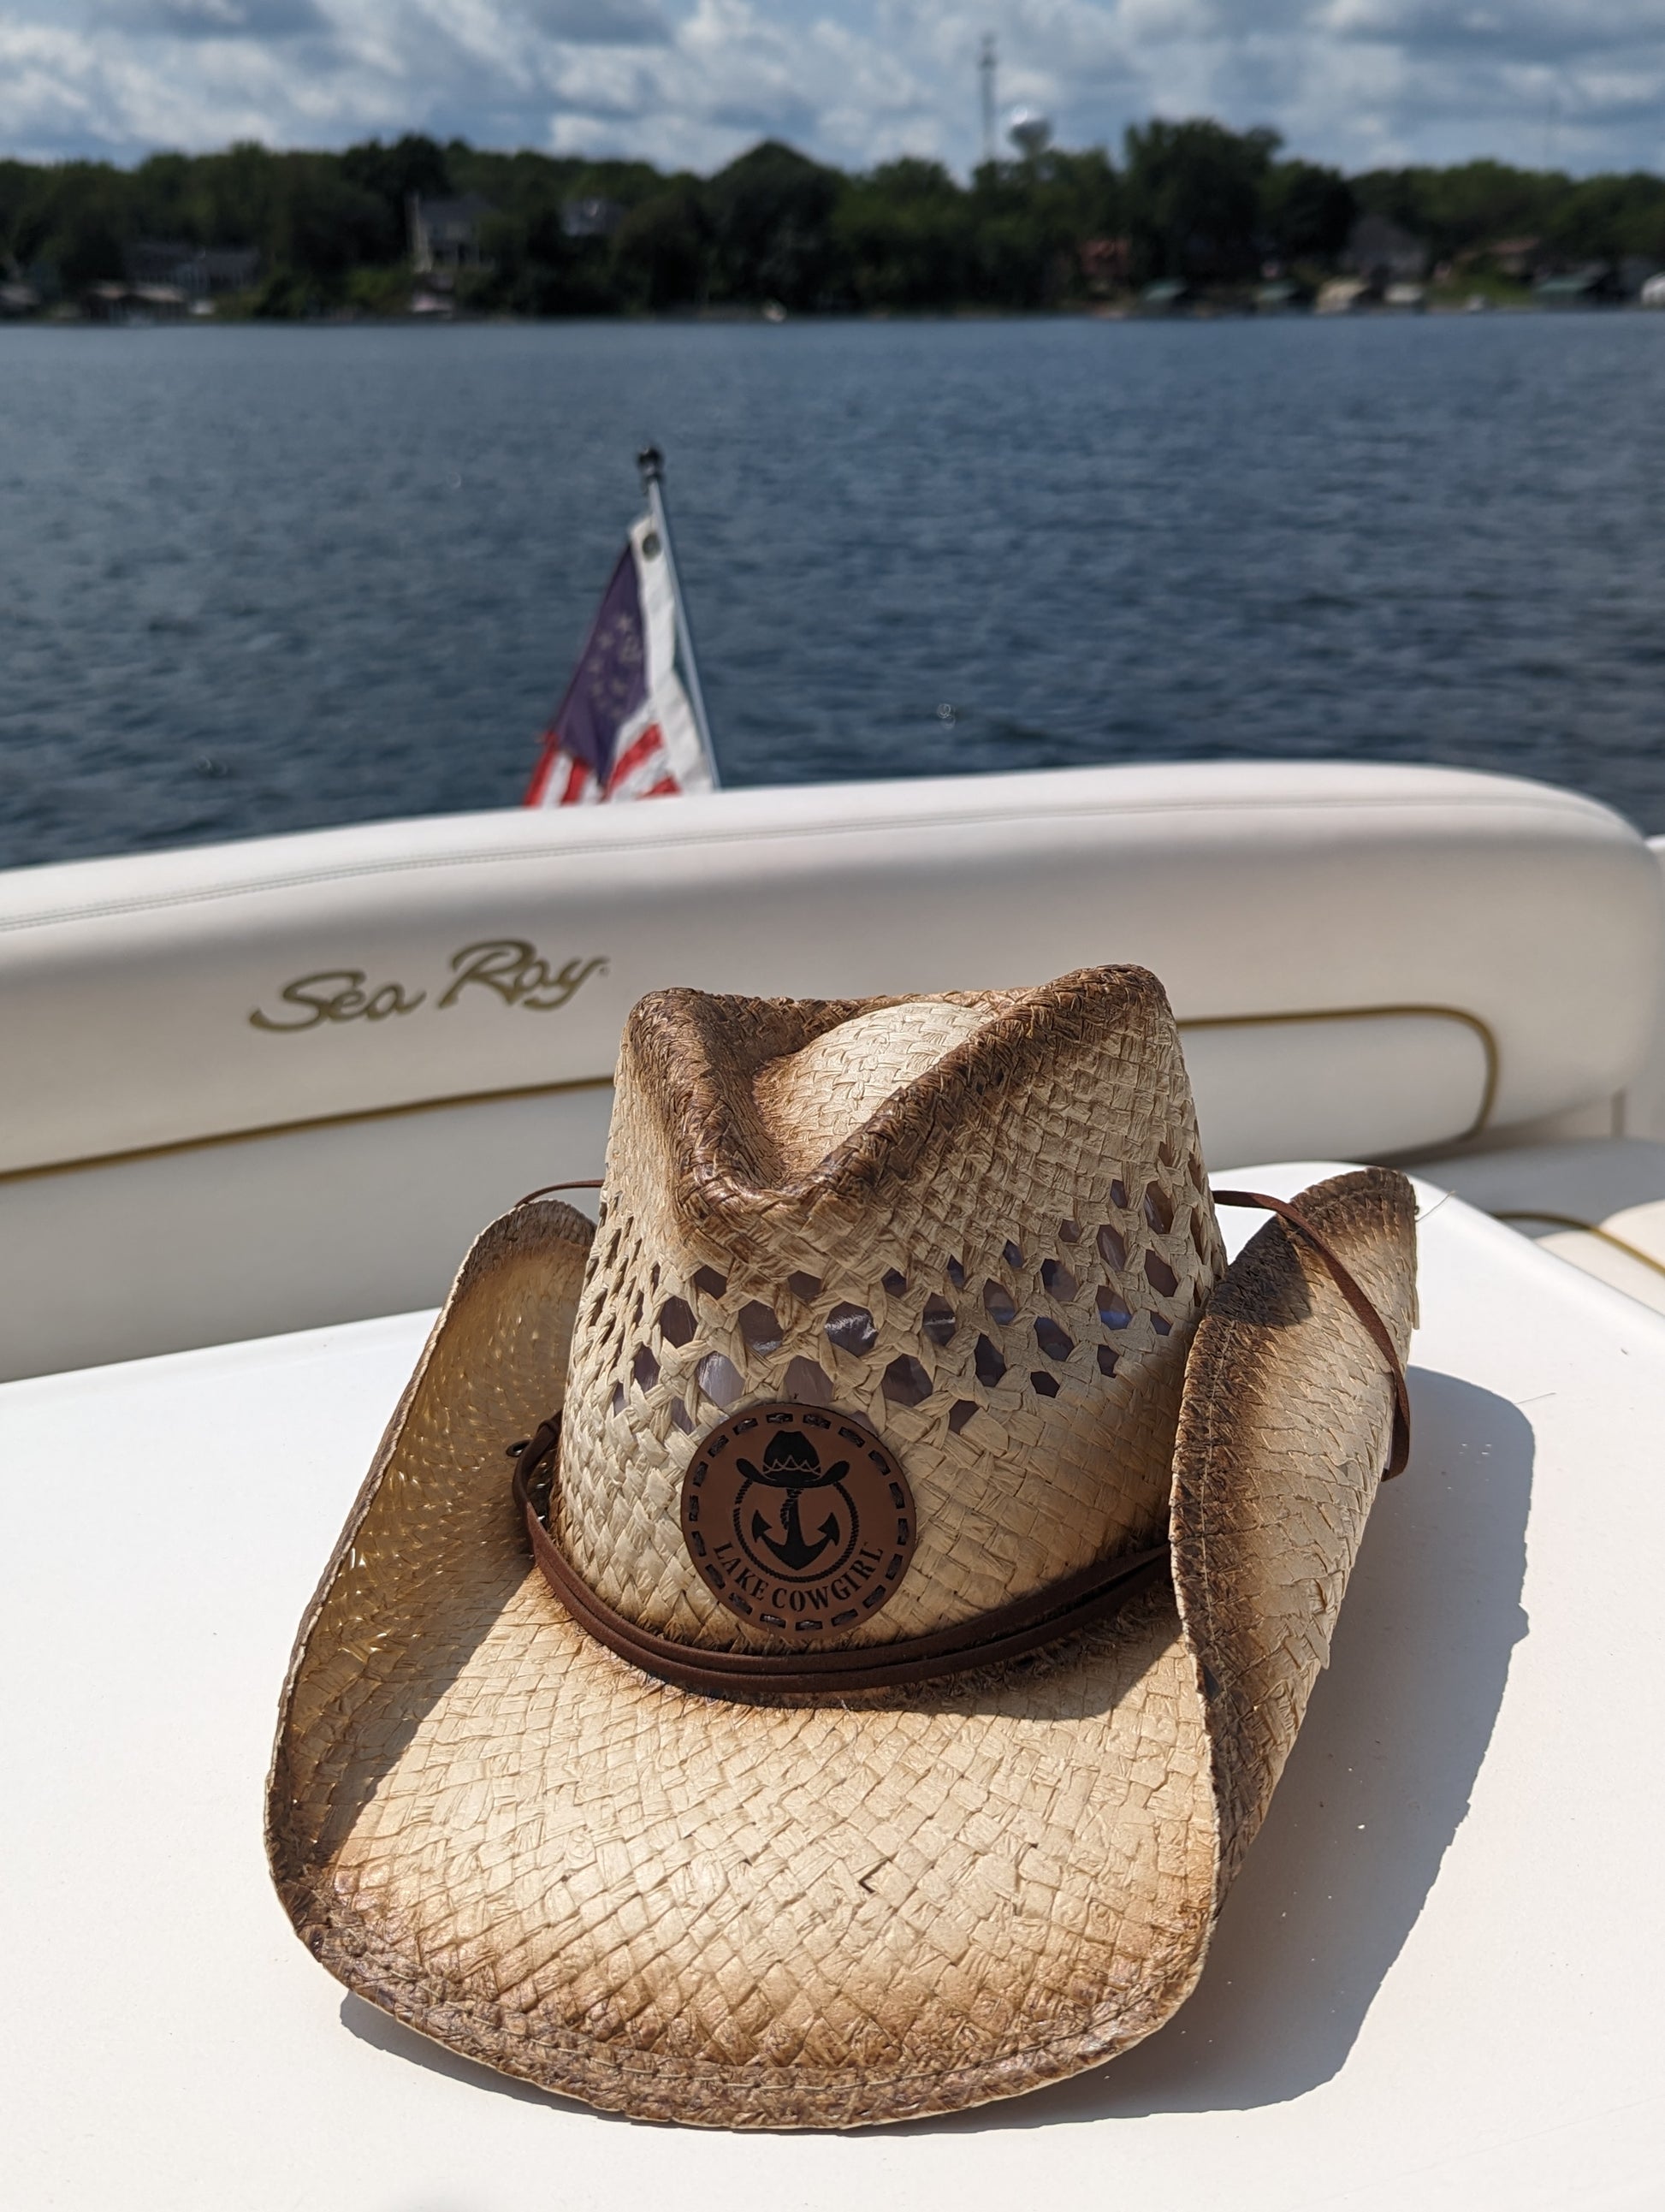 Photo of the Lake Cowgirl Signature Cowboy Hat shown sitting atop a table on a boat. Photo was taken on Lake Minnetonka.